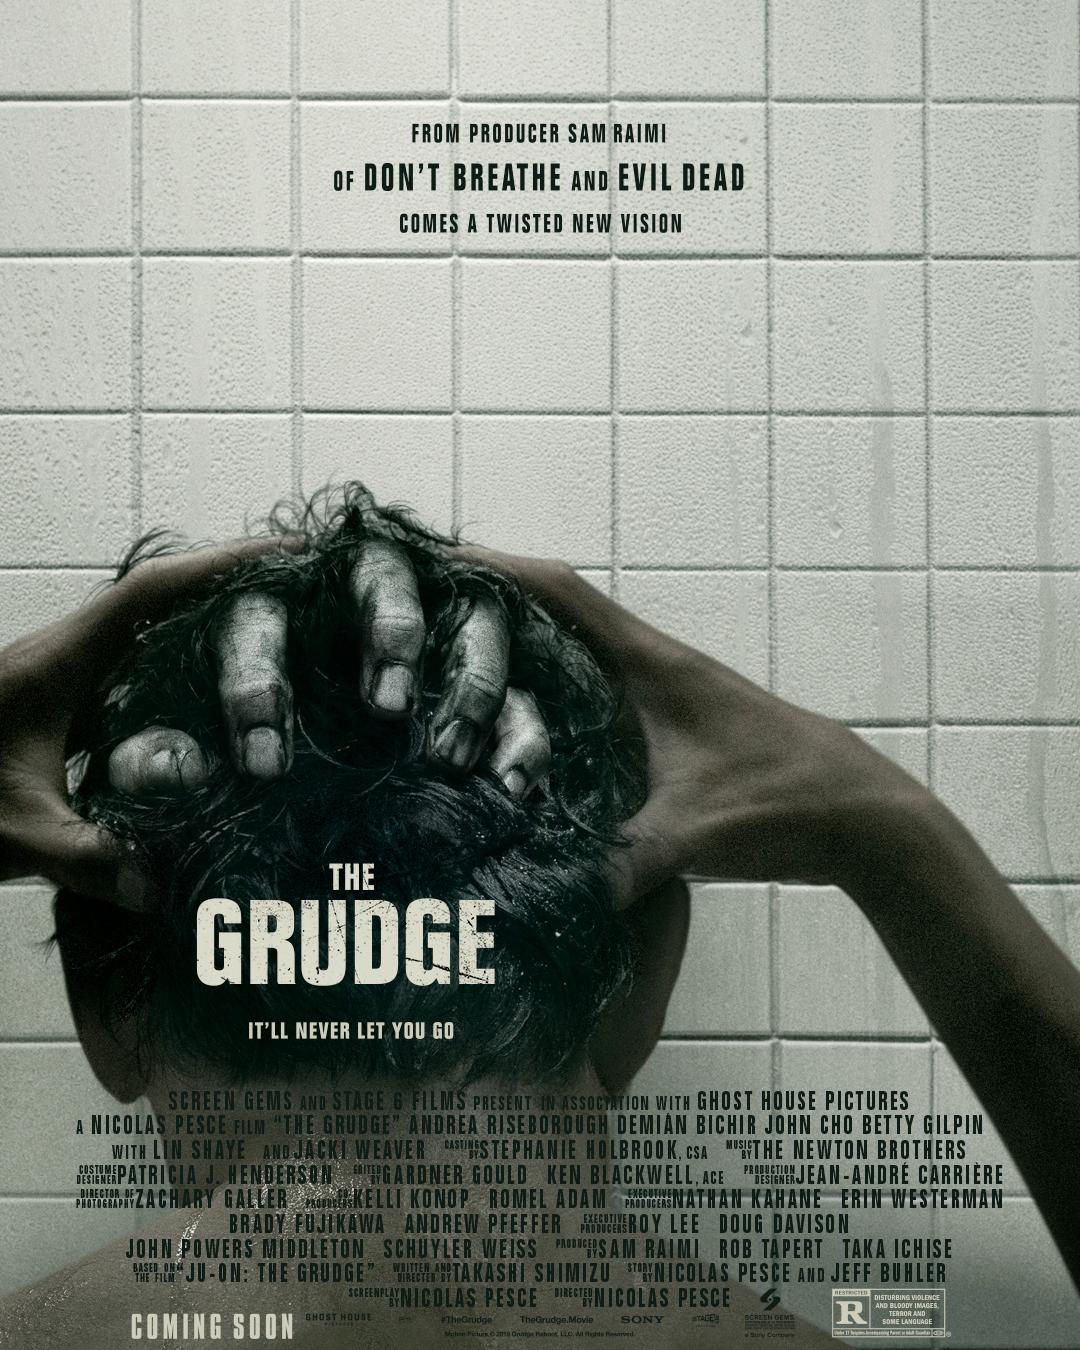 The Grudge - 2020 Theatrical Poster